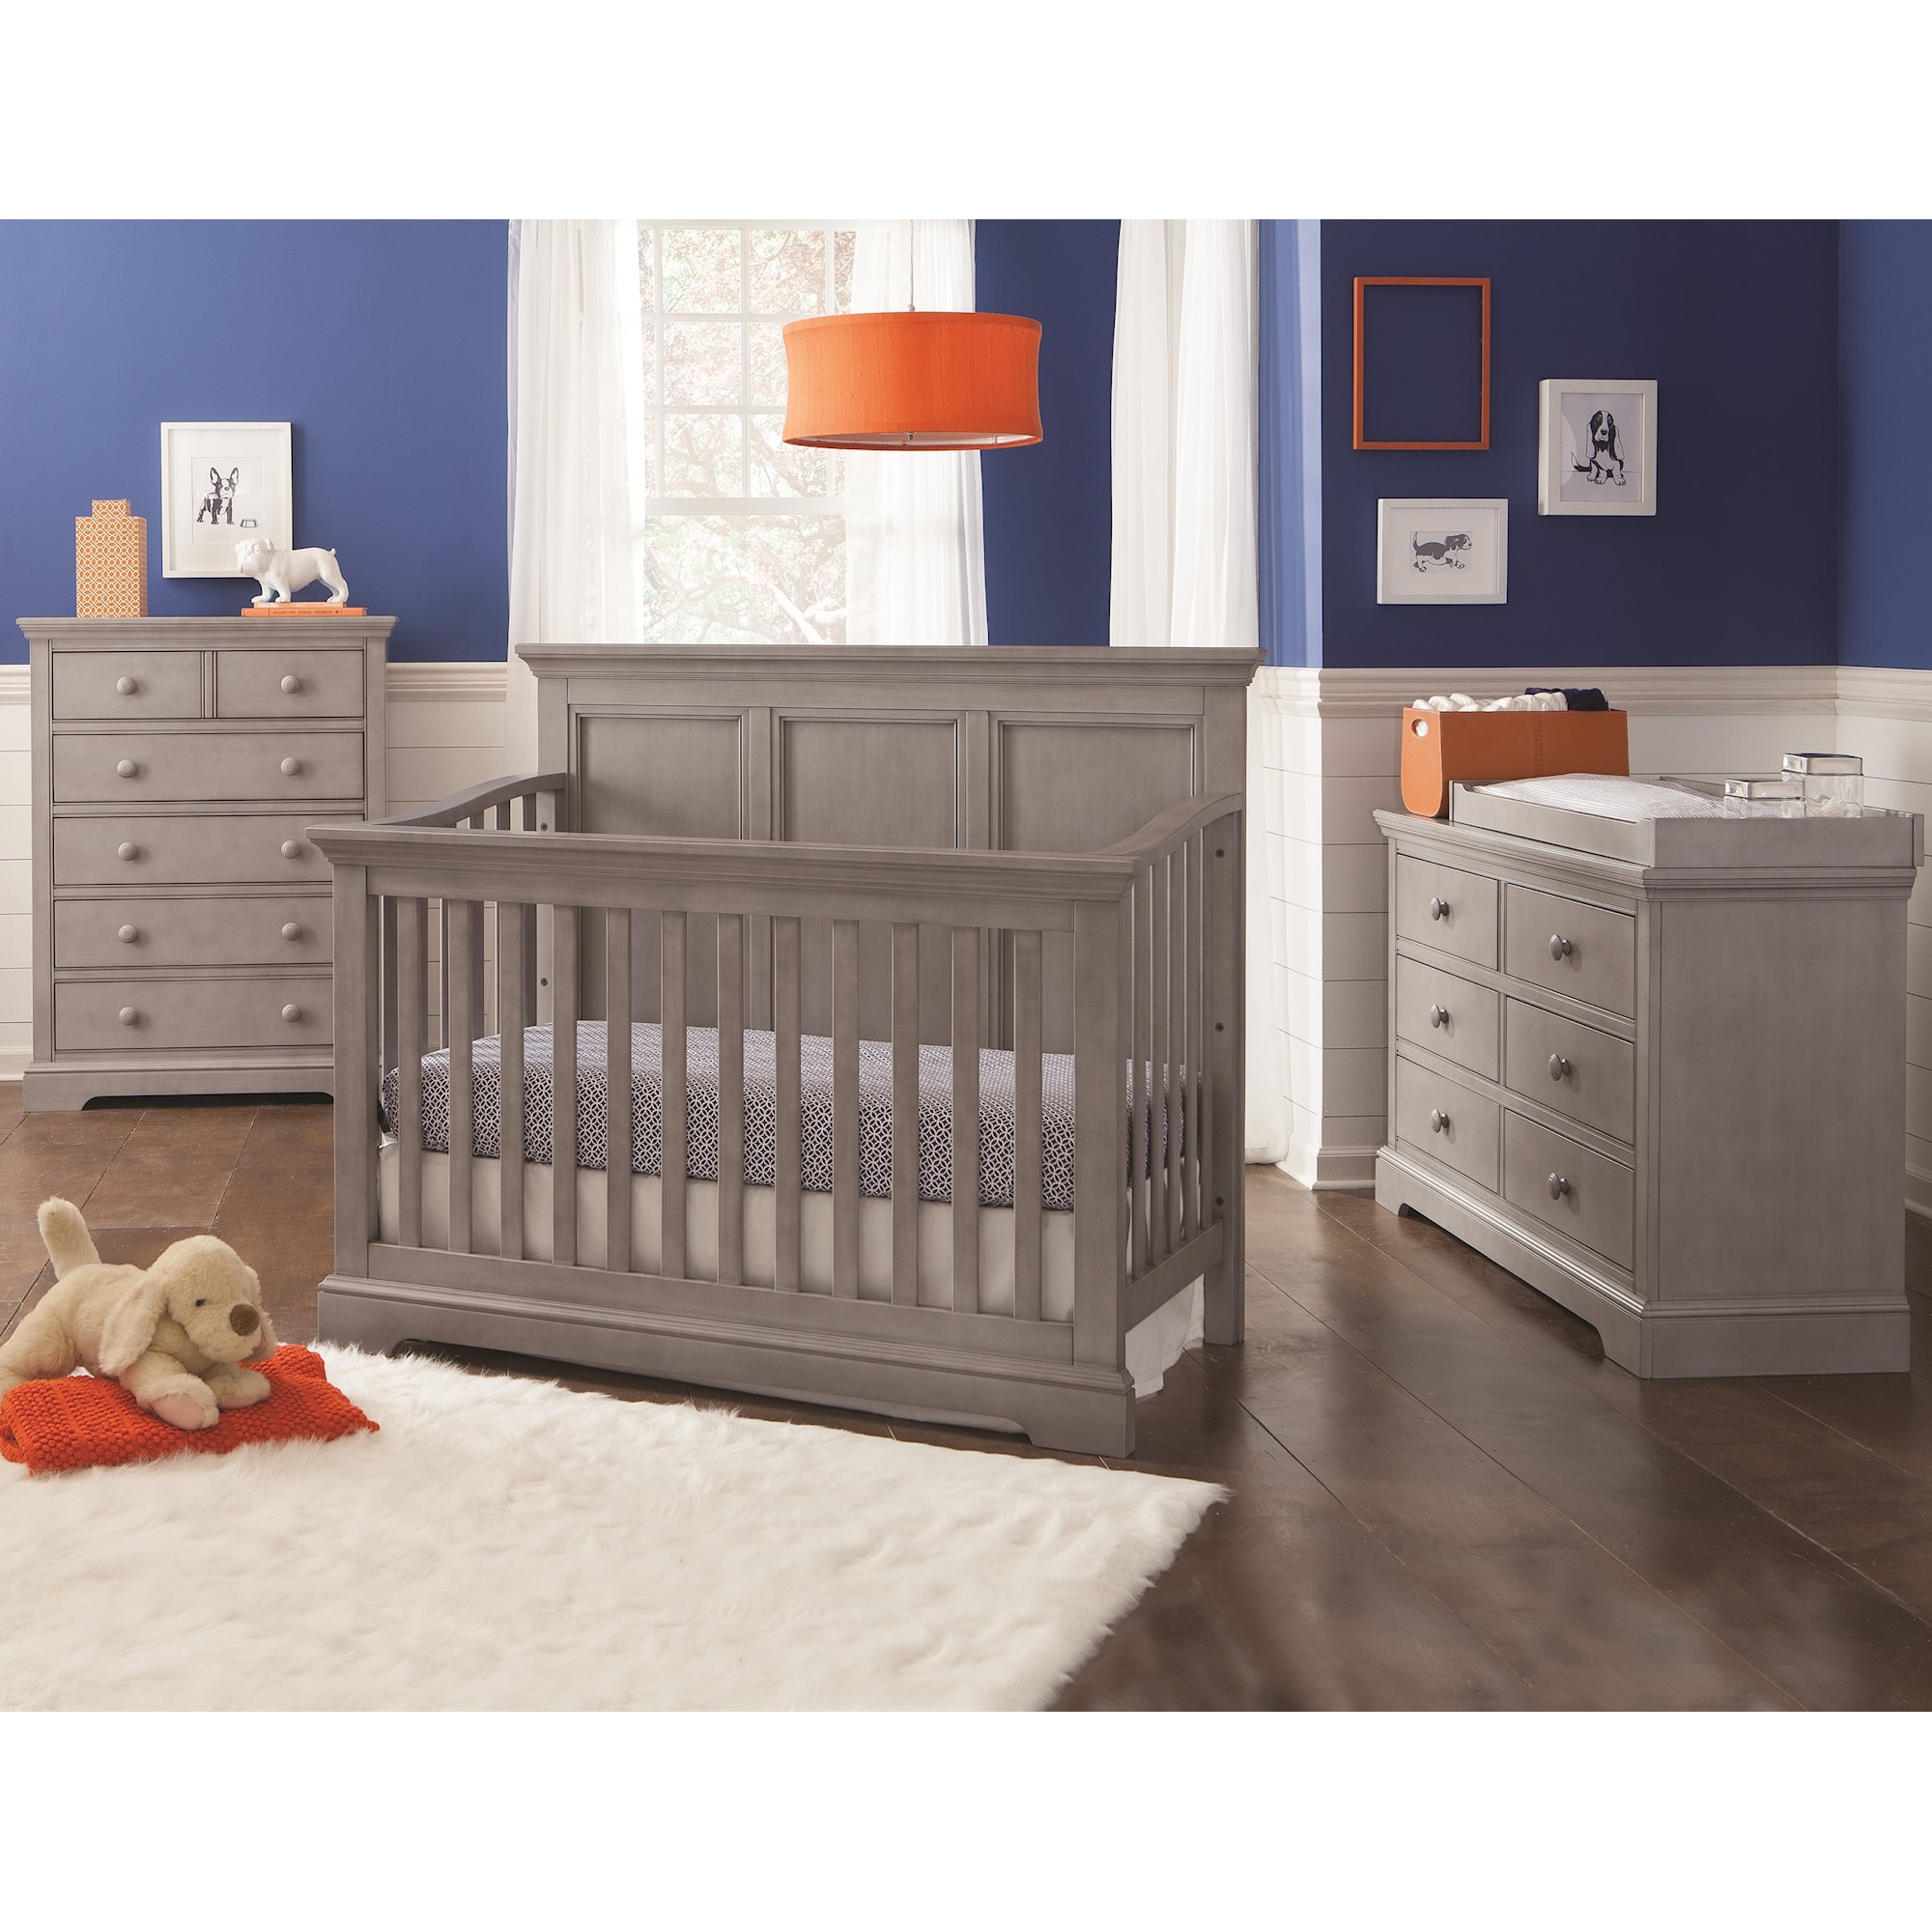 Painting Furniture For A Baby Nursery (Is It Safe To Paint A Crib